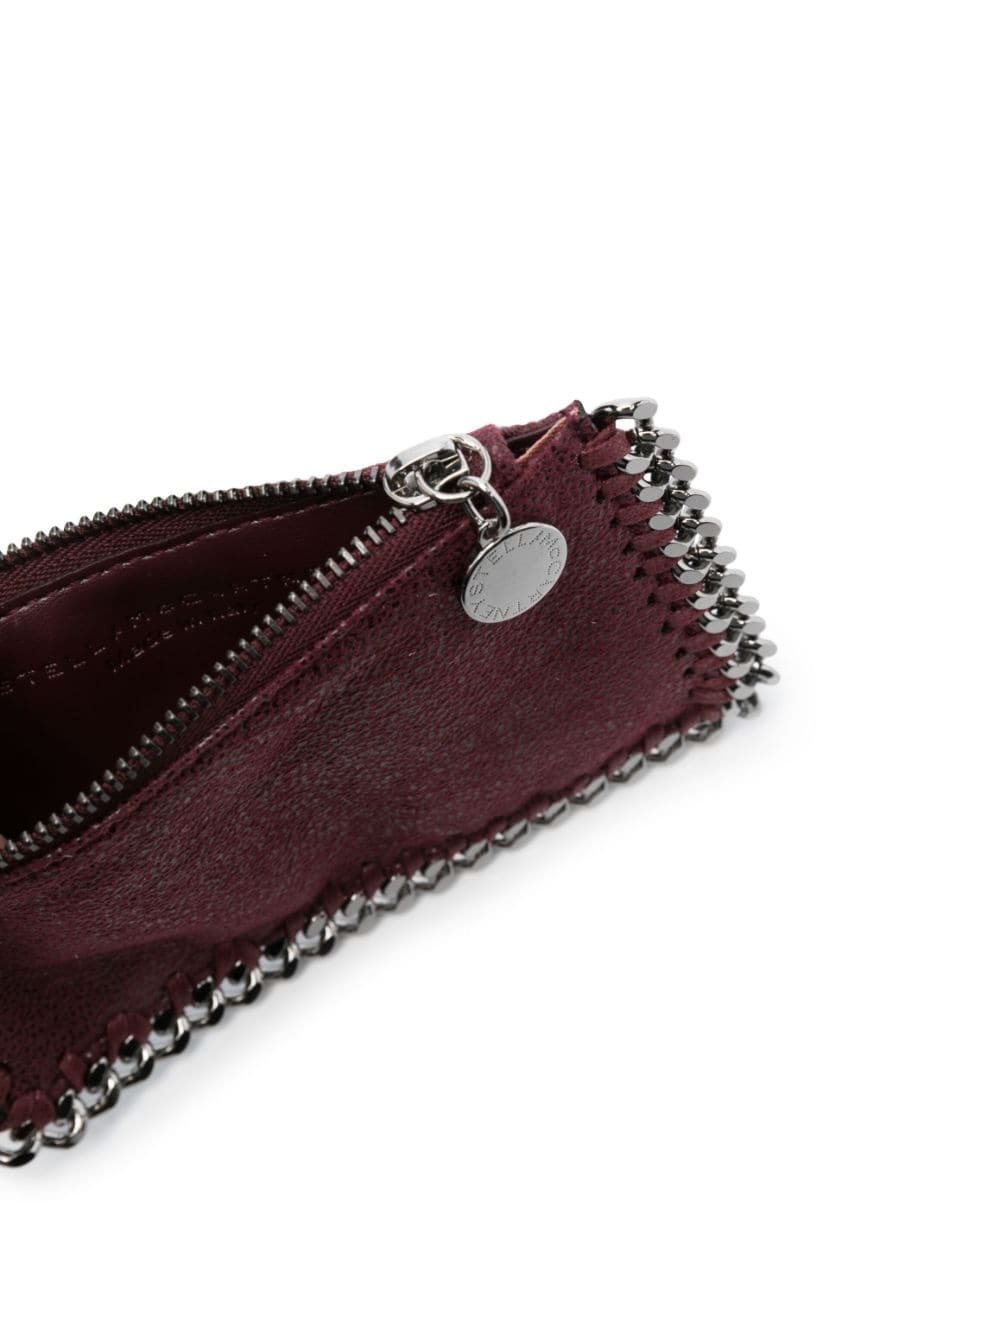 Falabella Zipped Cardholder - More Colors Available